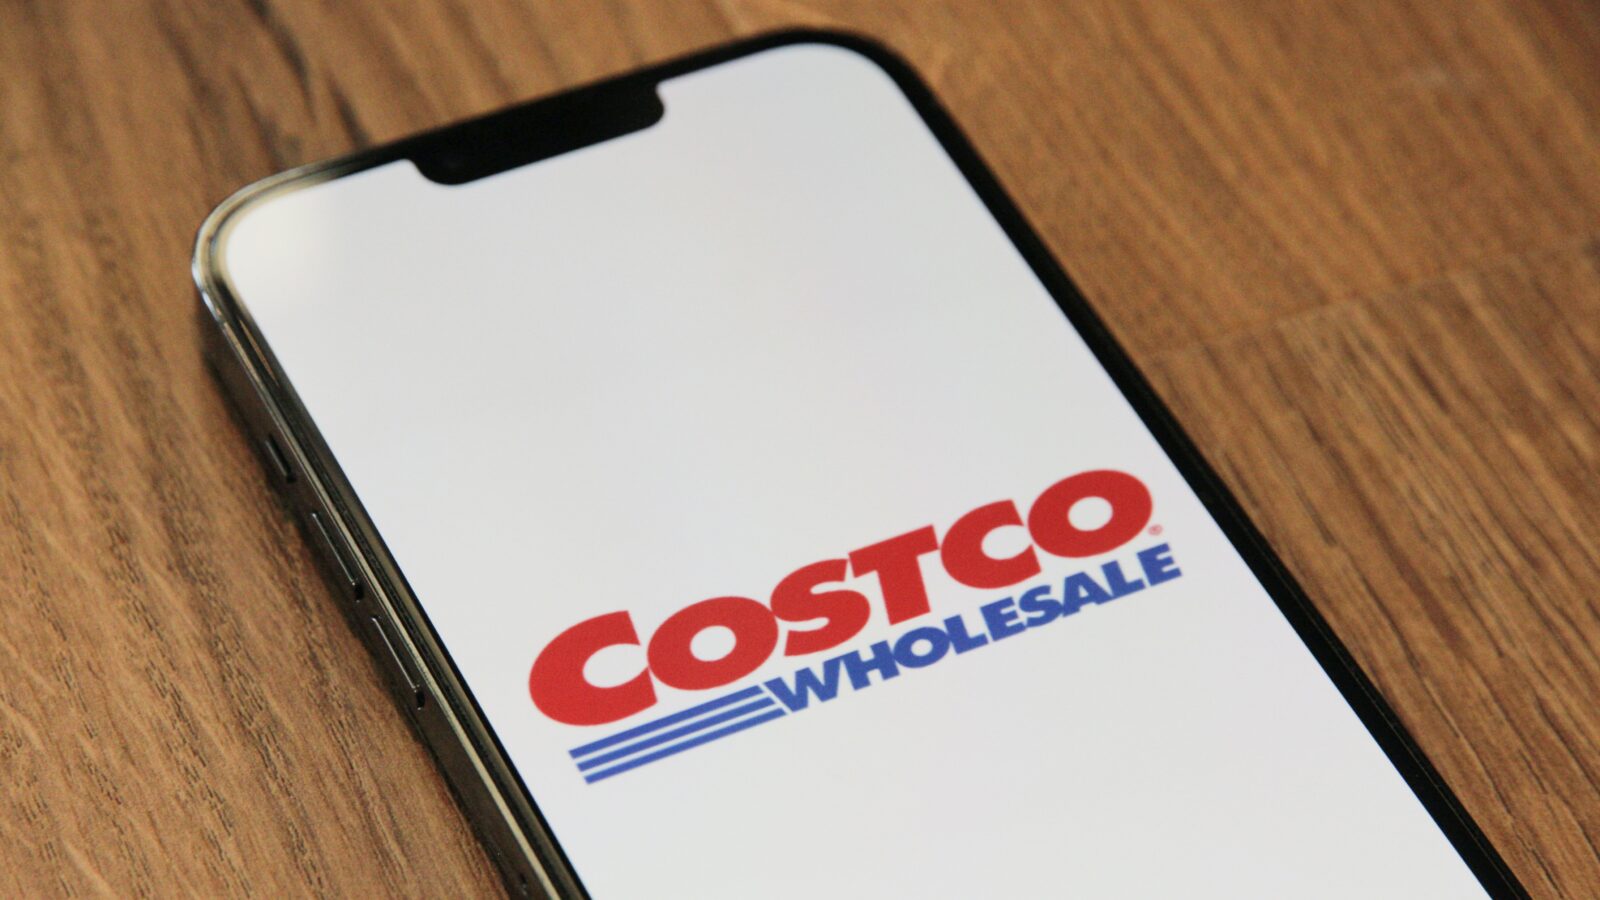 Costco website on mobile representing a termination of an employee